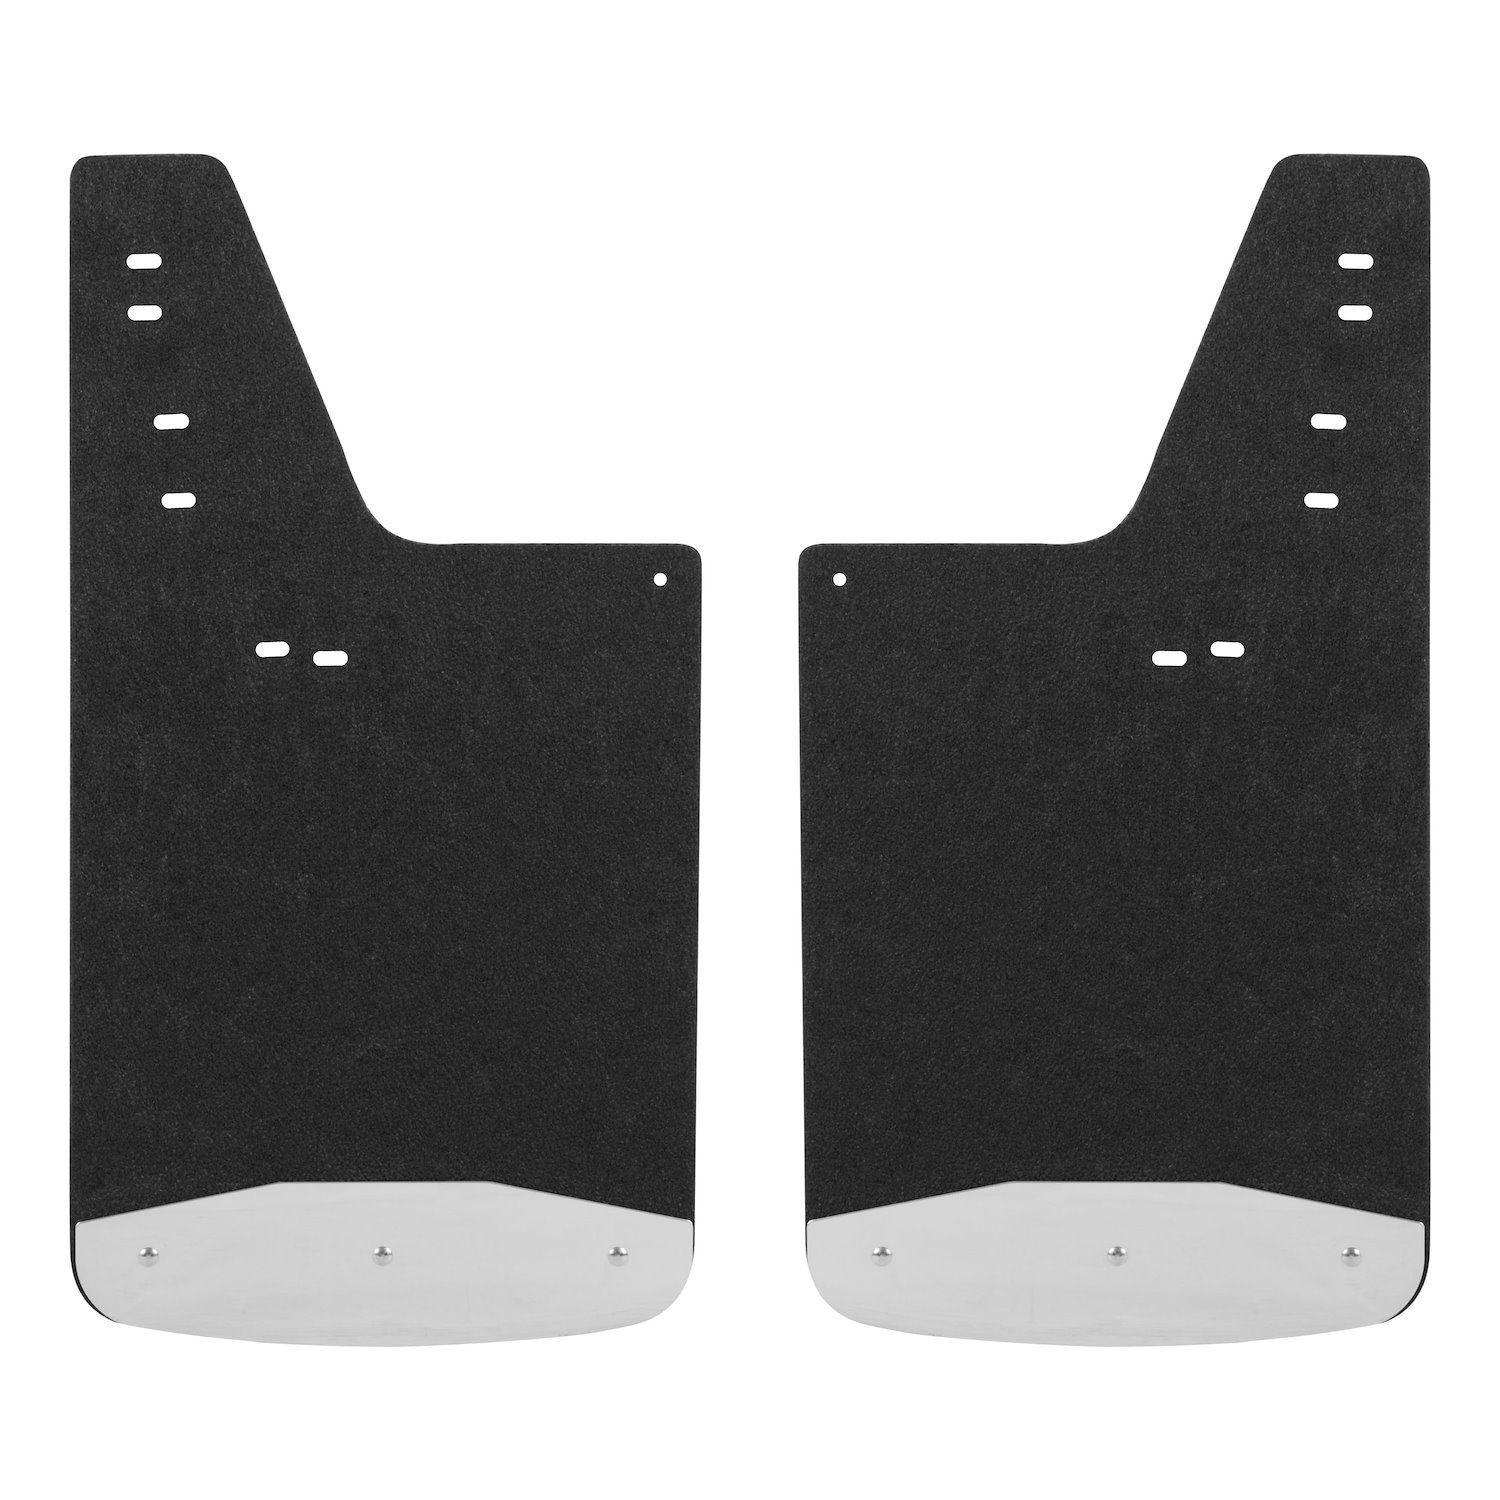 251123 Front or Rear 12 in. x 23 in. Rubber Mud Guards Fits Select Ford Super Duty